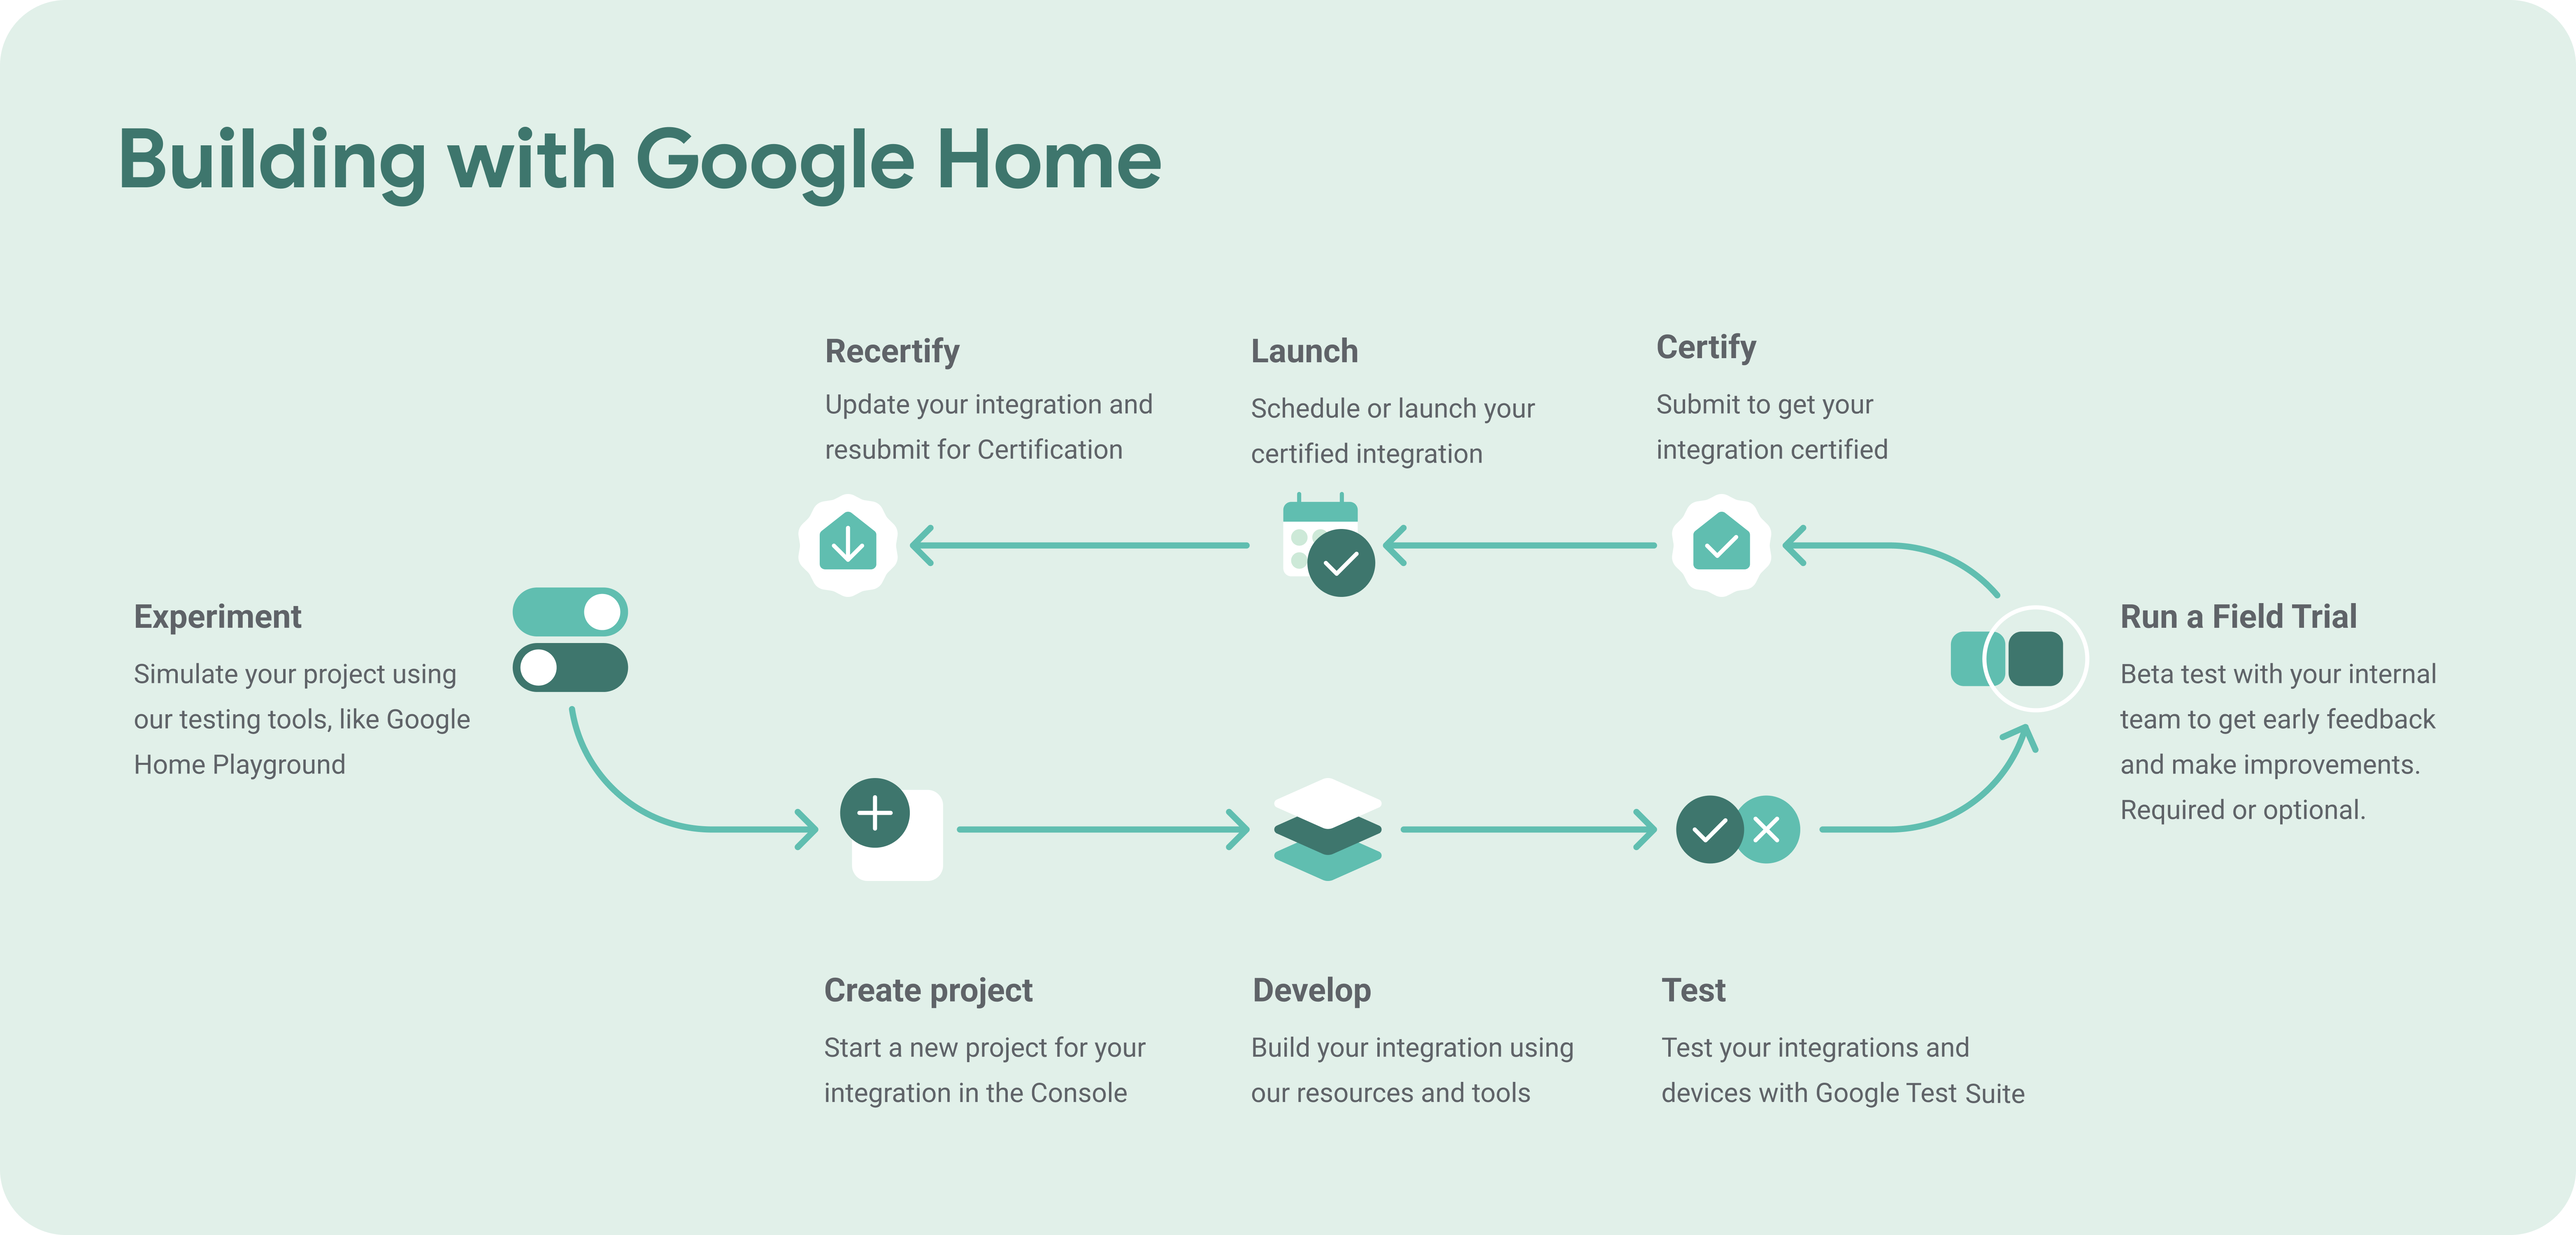 Illustration showing the Building with Google Home certification process.